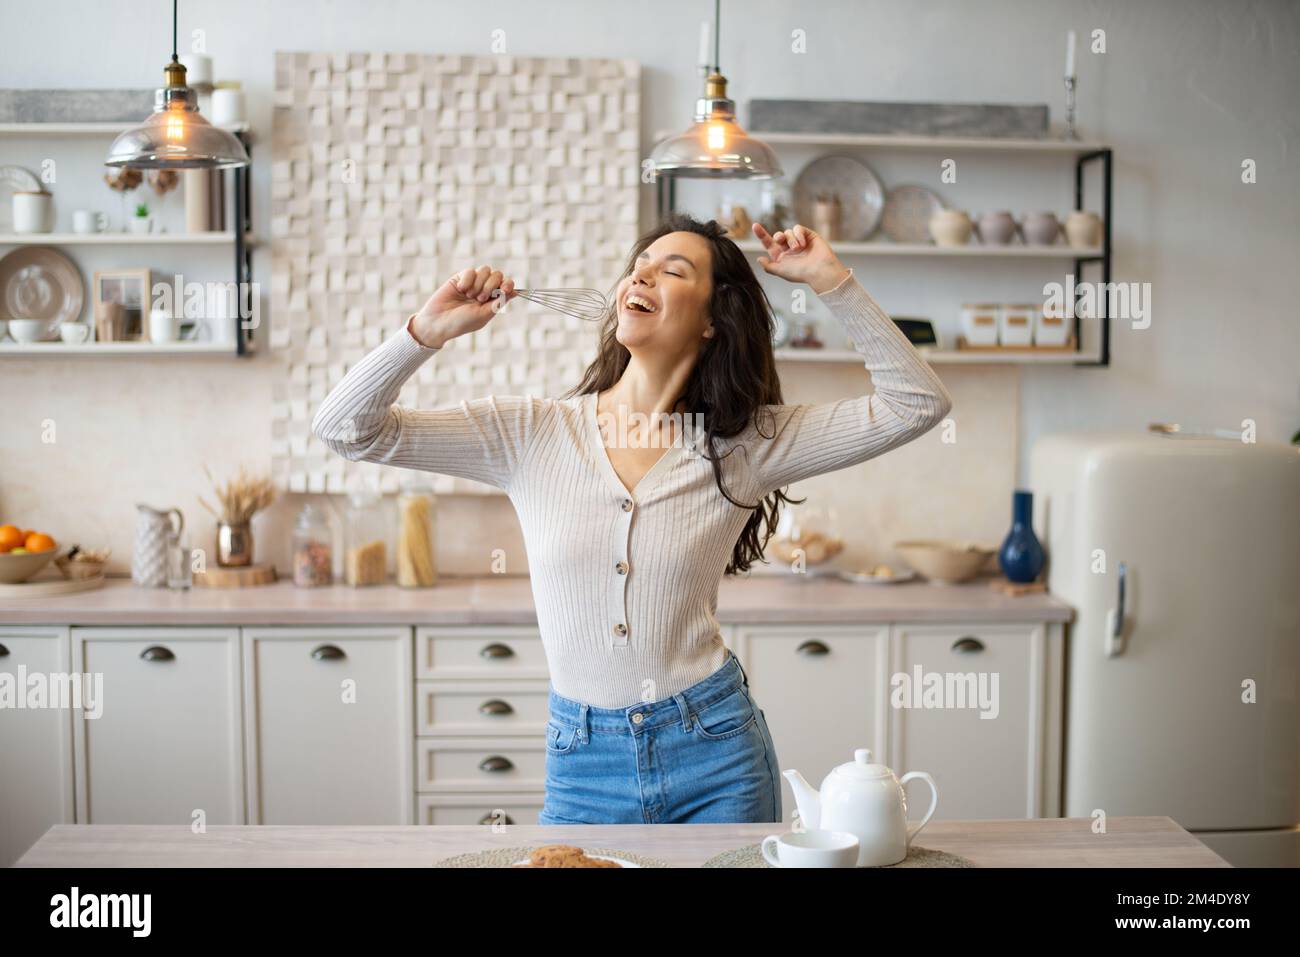 Playful young woman singing at appliance as imaginary microphone, dancing in light kitchen interior, copy space Stock Photo